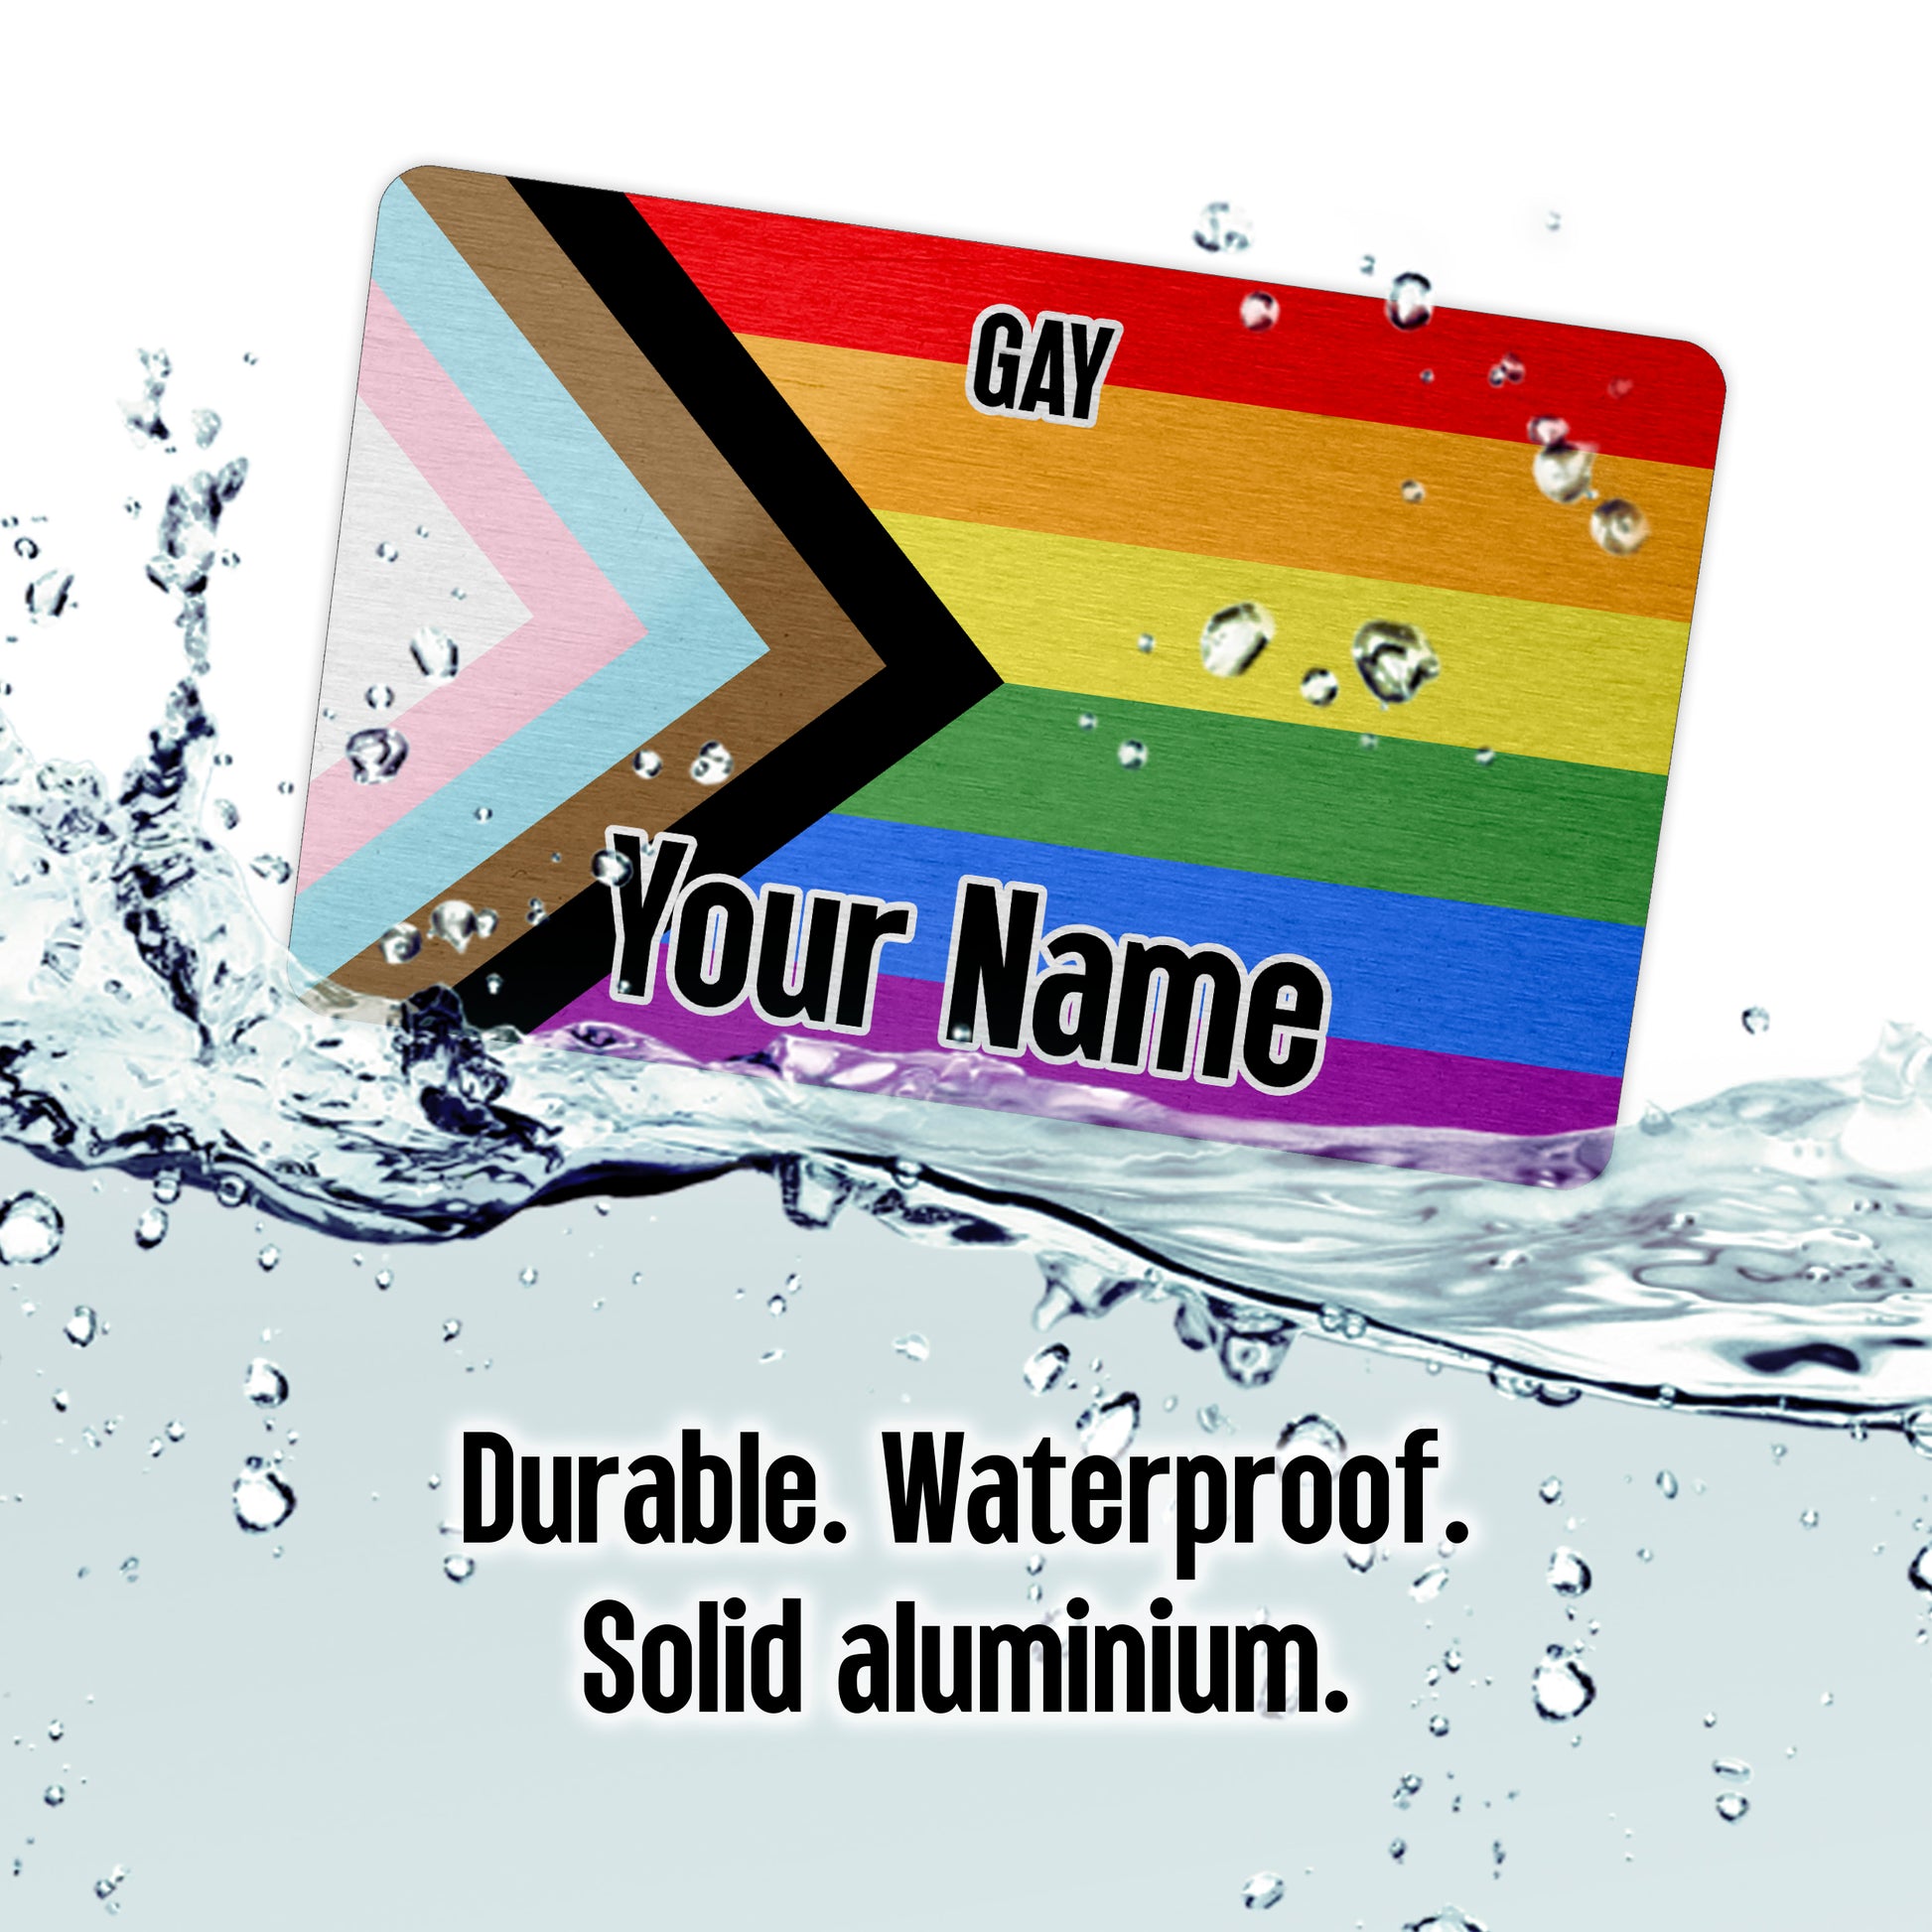 Aluminium metal wallet card personalised with your name and the gay progress pride flag